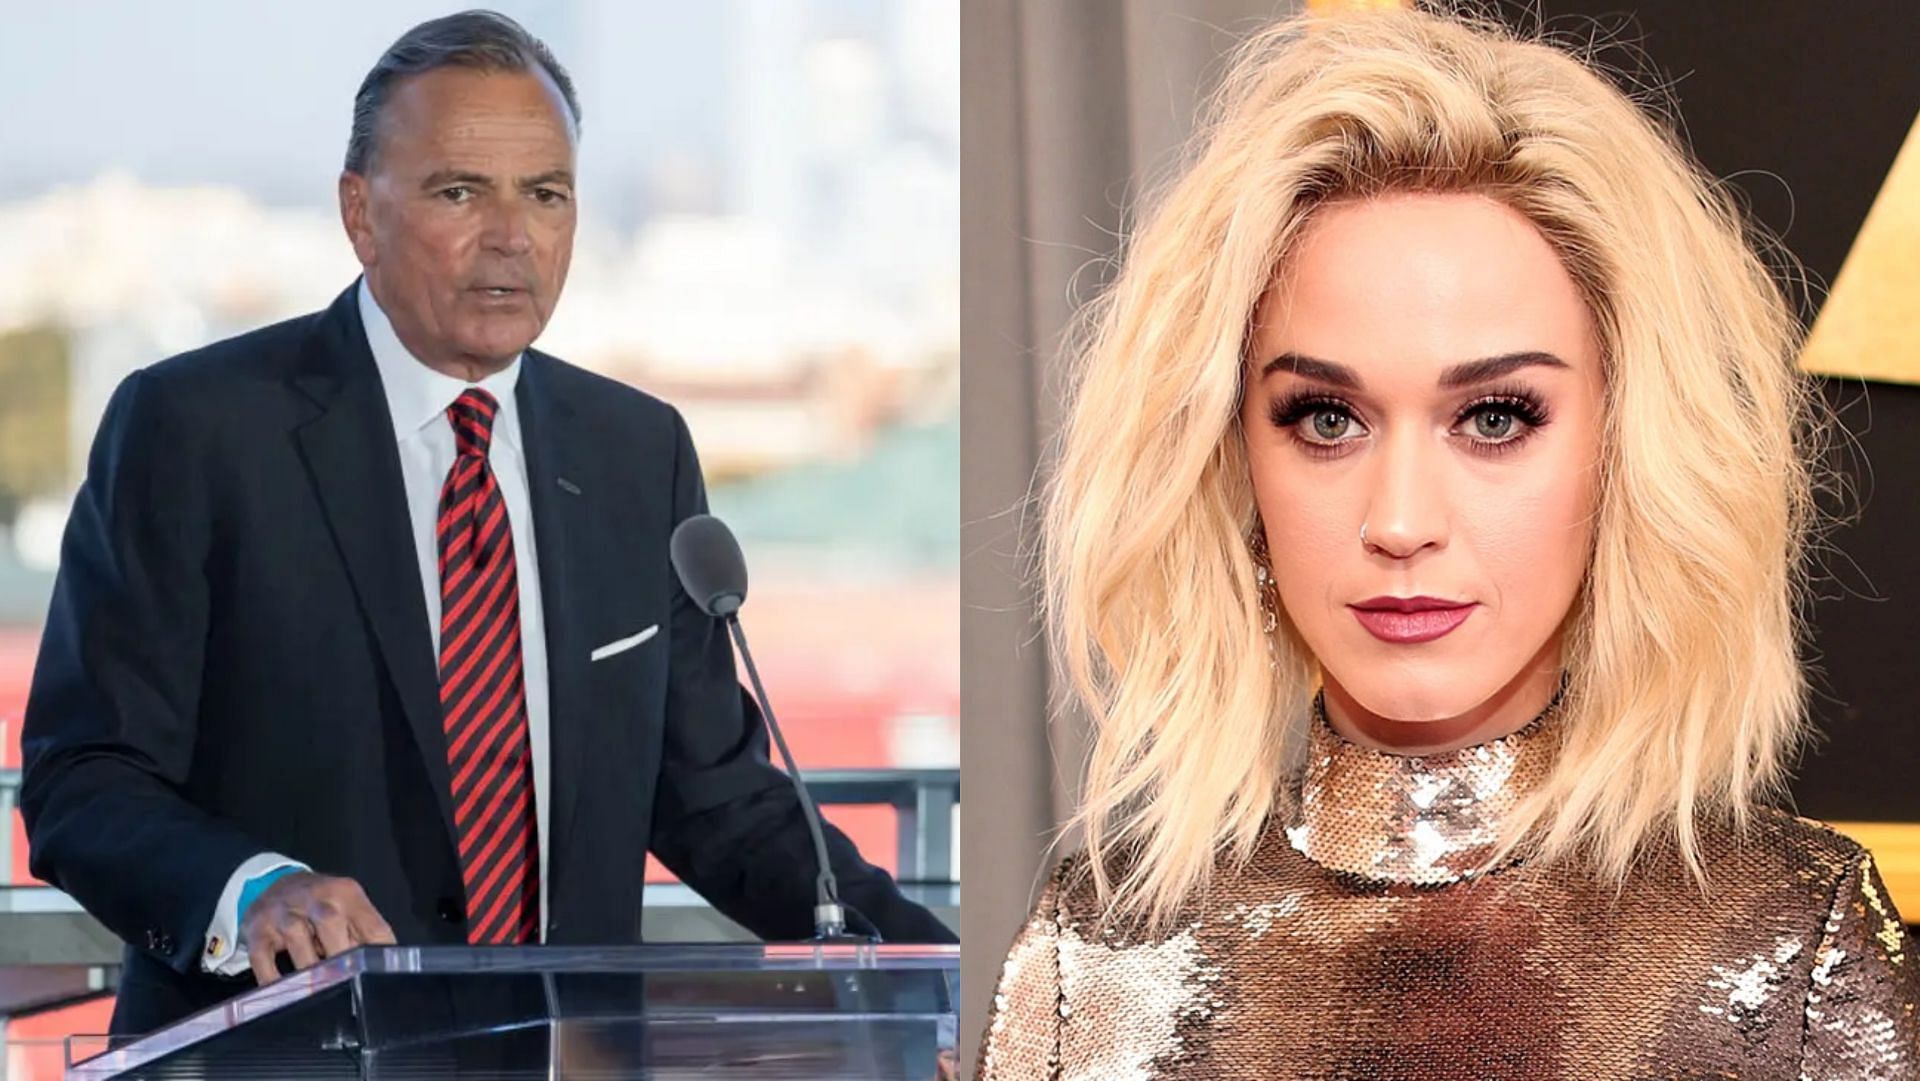 Katy Perry was slammed online for previously endorsing Rick Caruso as the mayoral candidate for Los Angeles (Image via Hans Gutknecht/Getty Images, Christopher Polk/Getty Images)